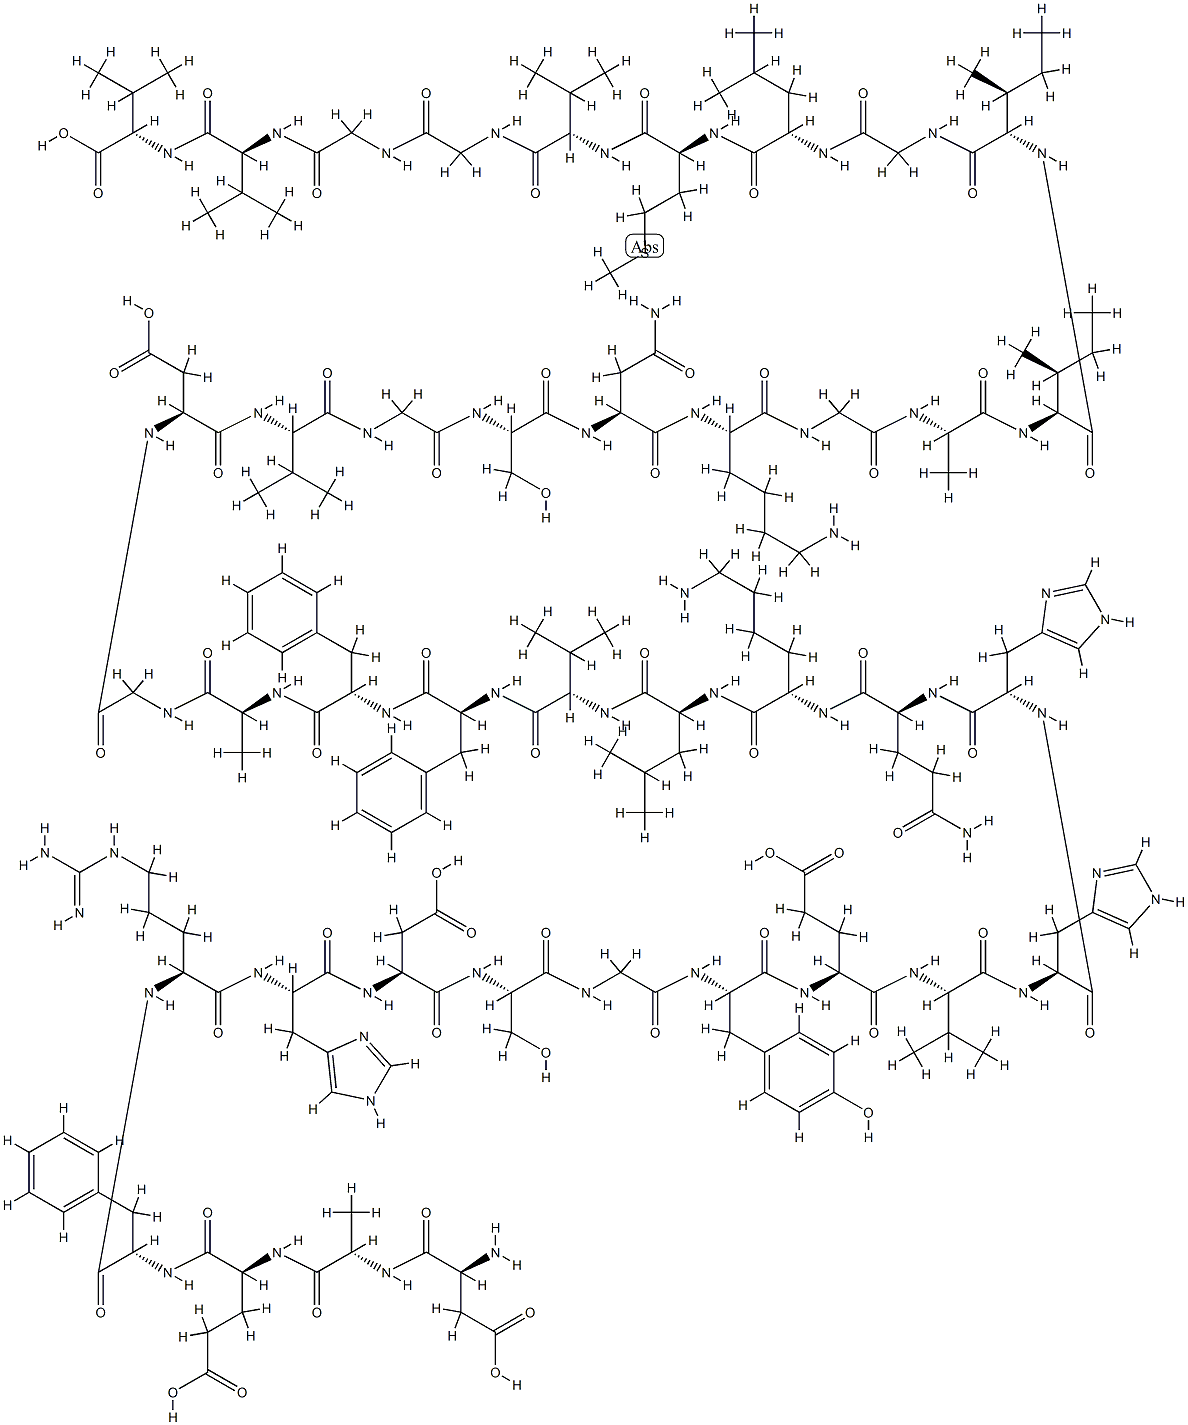 (GLY22)-AMYLOID Β-PROTEIN (1-40), 175010-18-1, 结构式